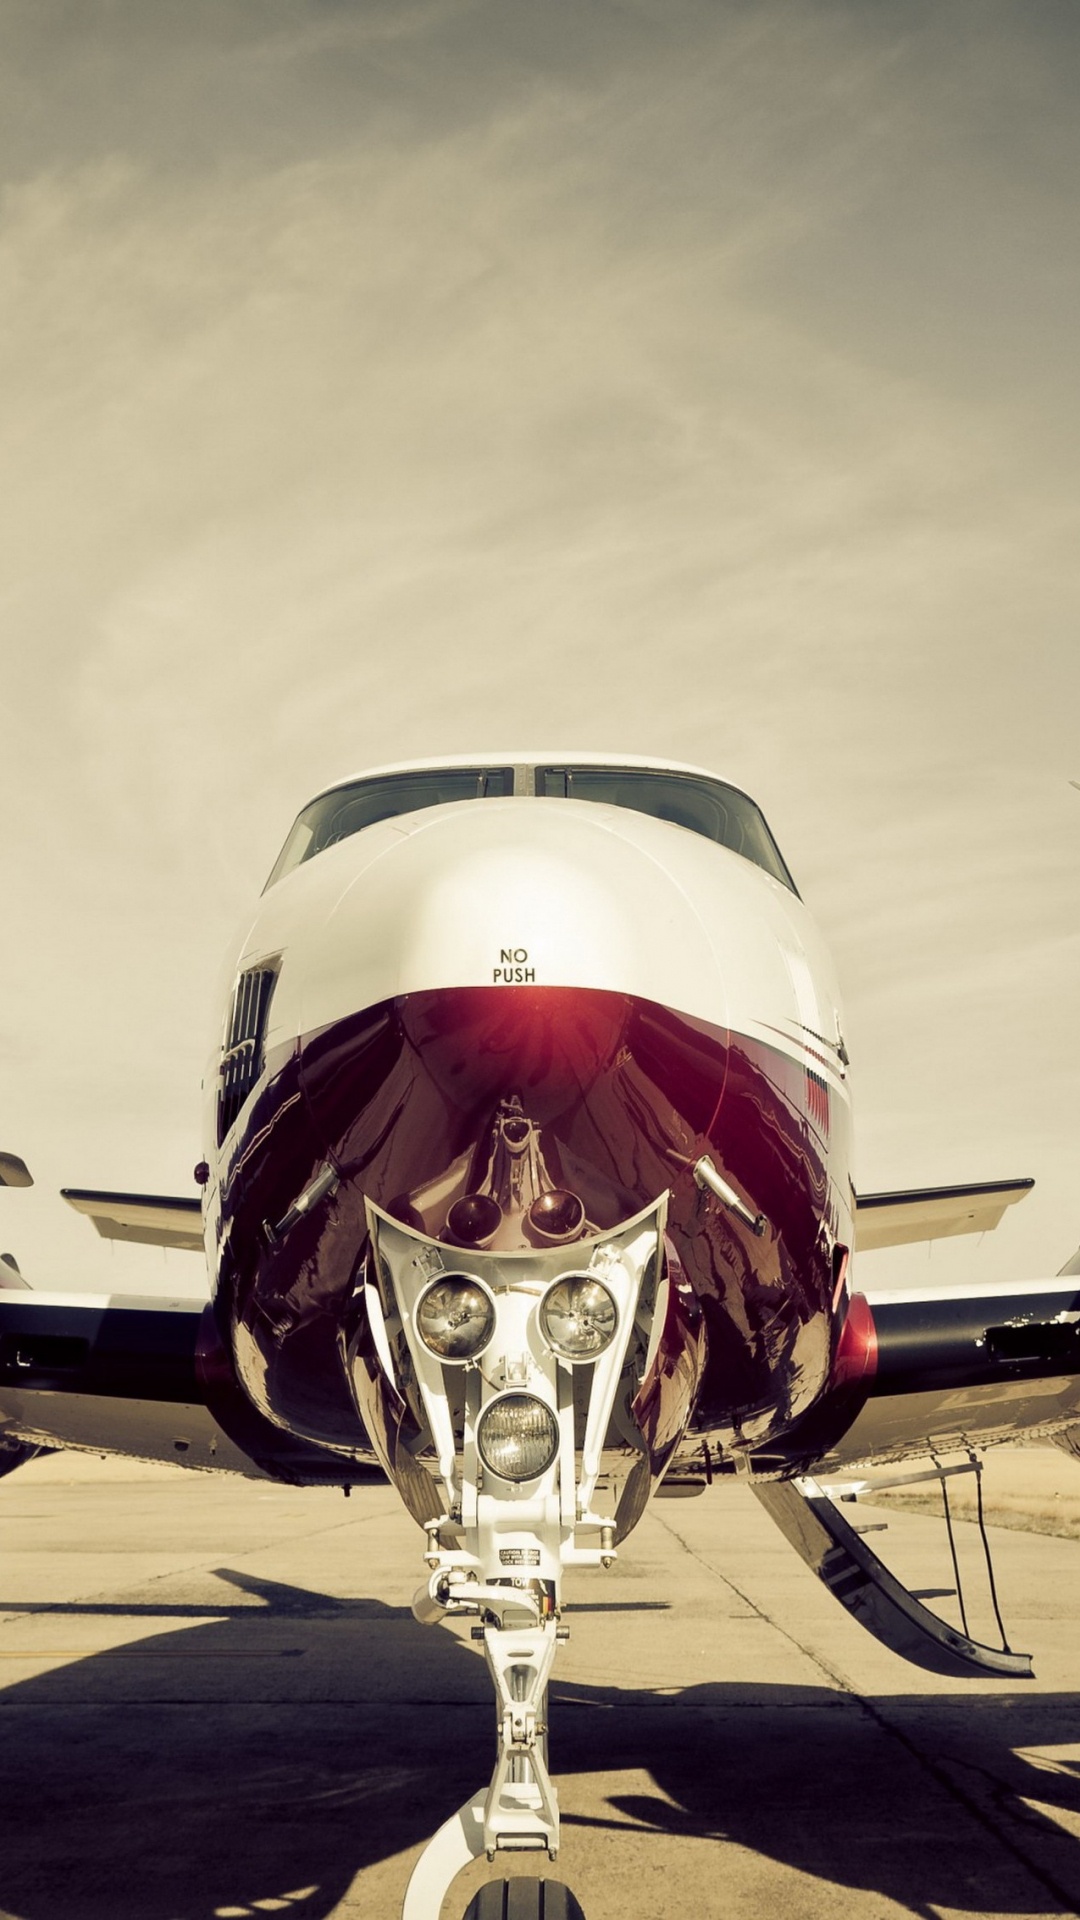 Red and White Airplane on The Ground. Wallpaper in 1080x1920 Resolution